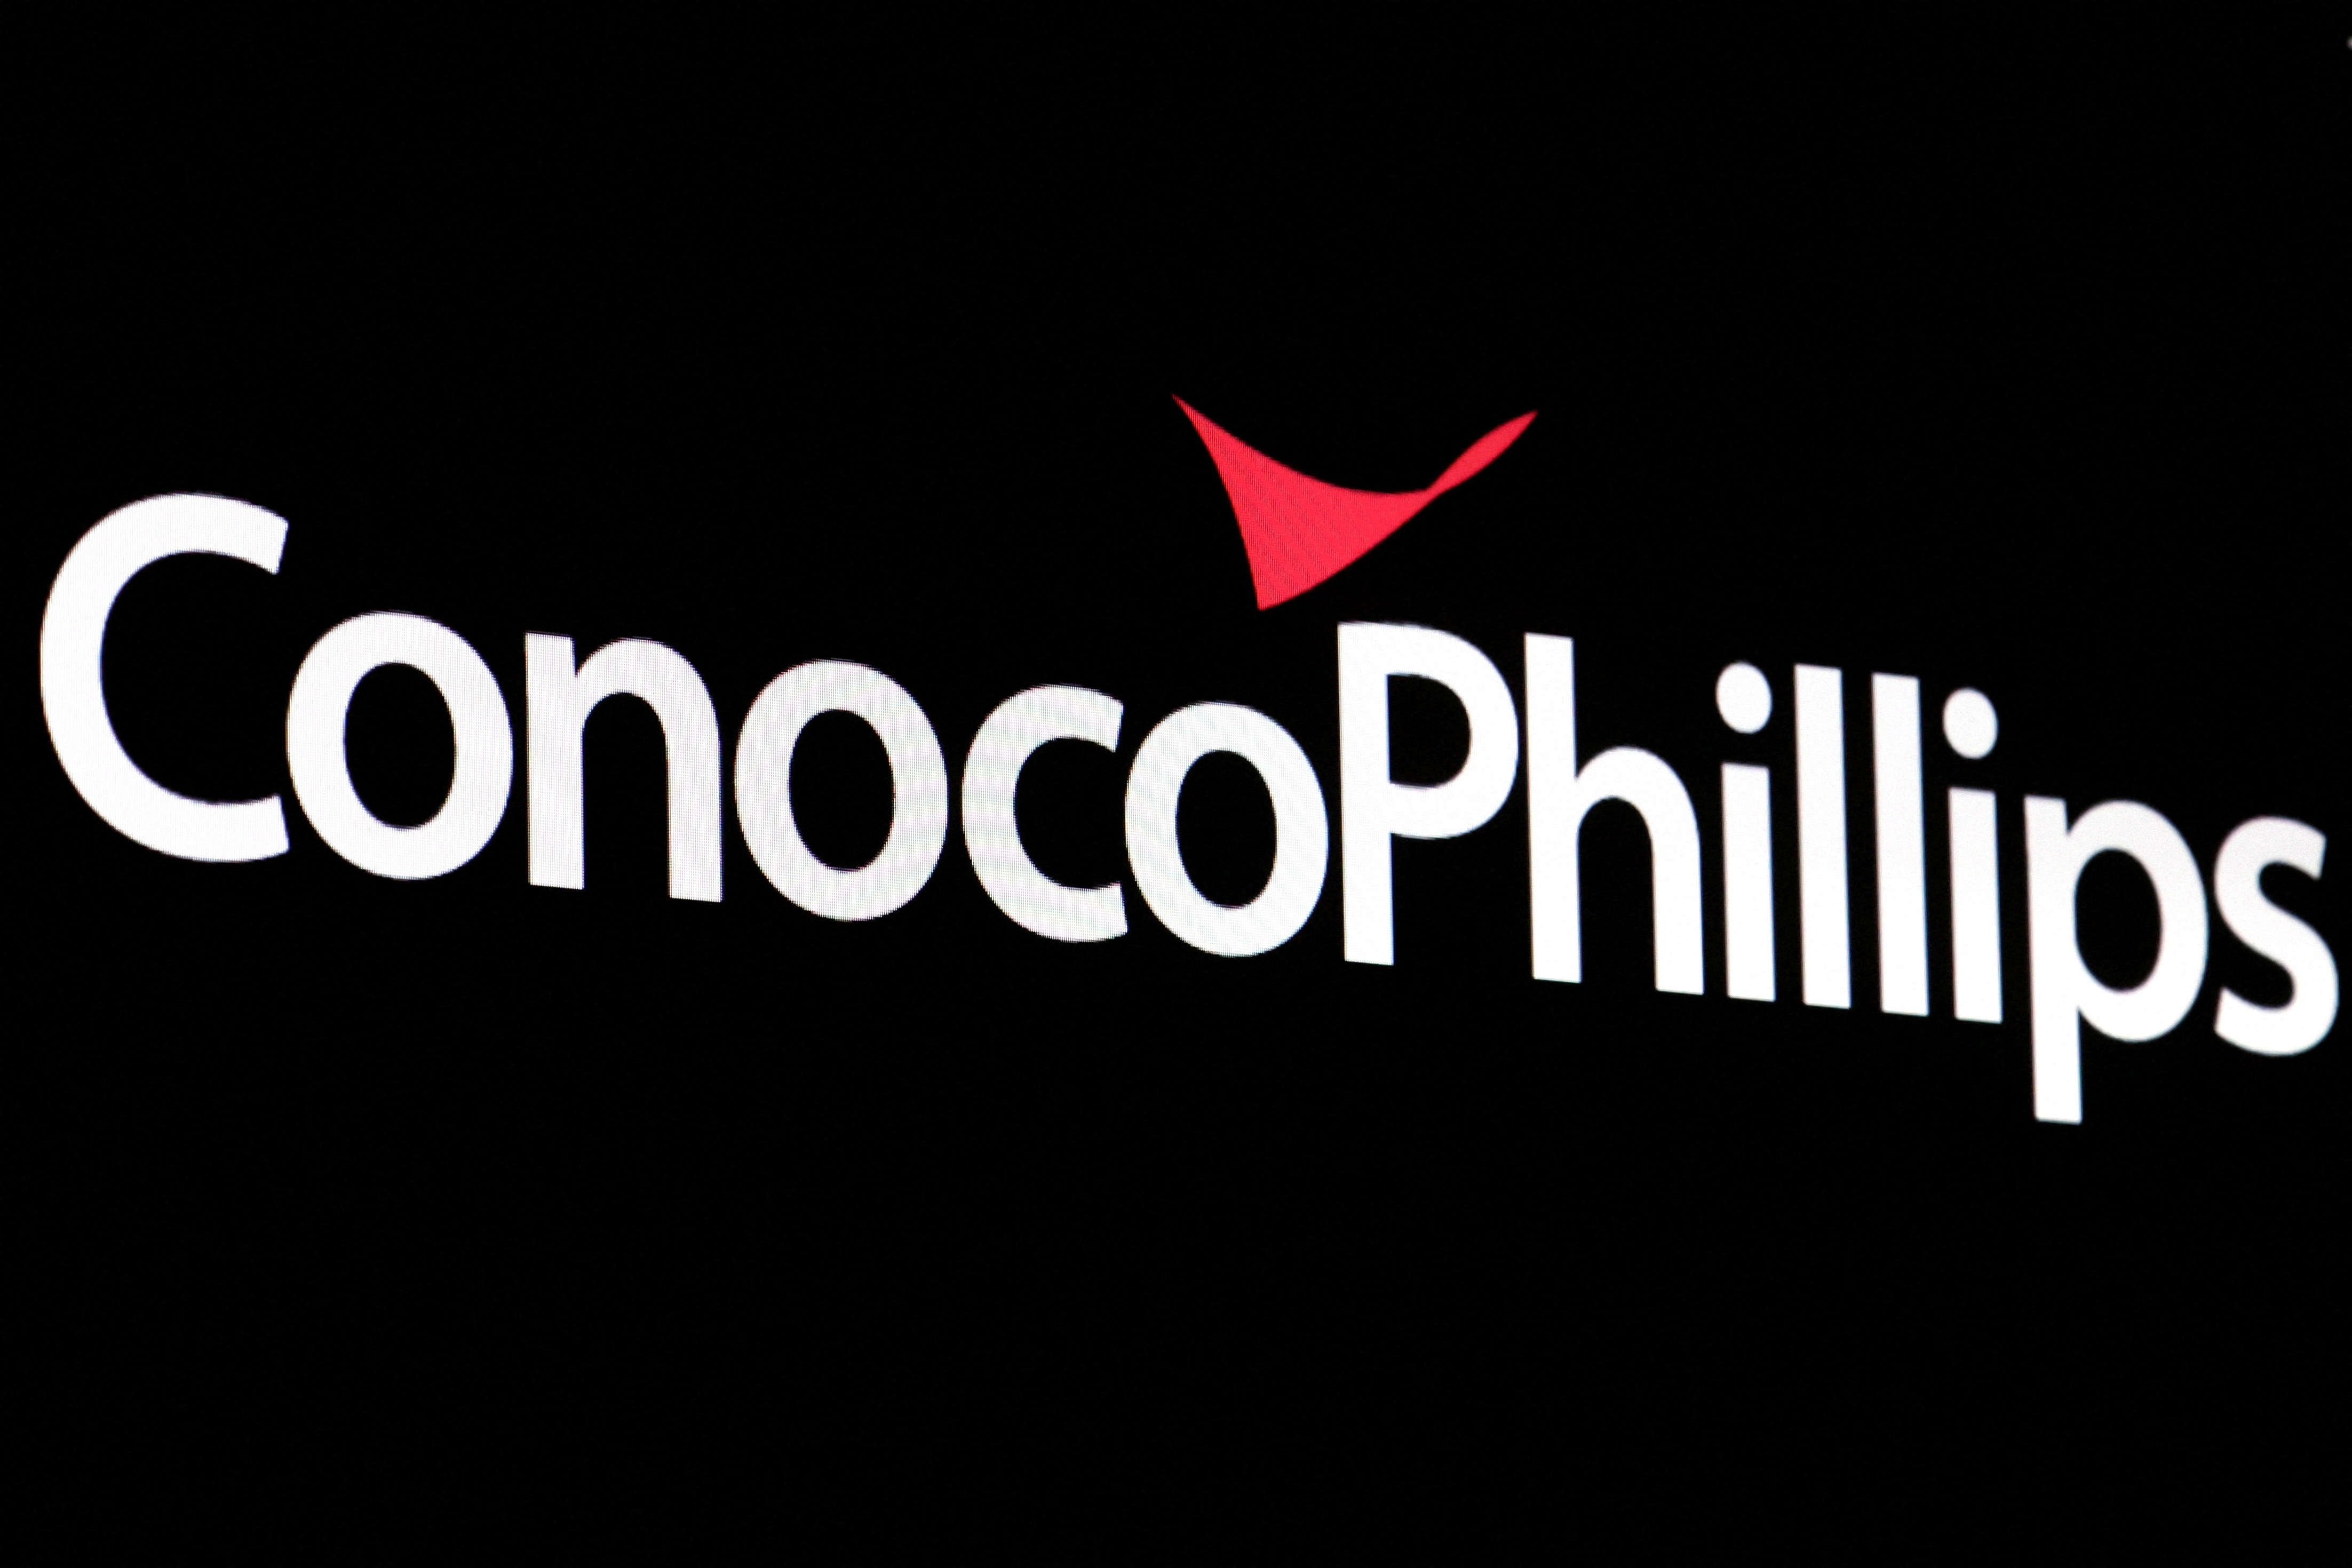 ConocoPhillips joins rivals with bumper profit on higher energy prices |  Reuters